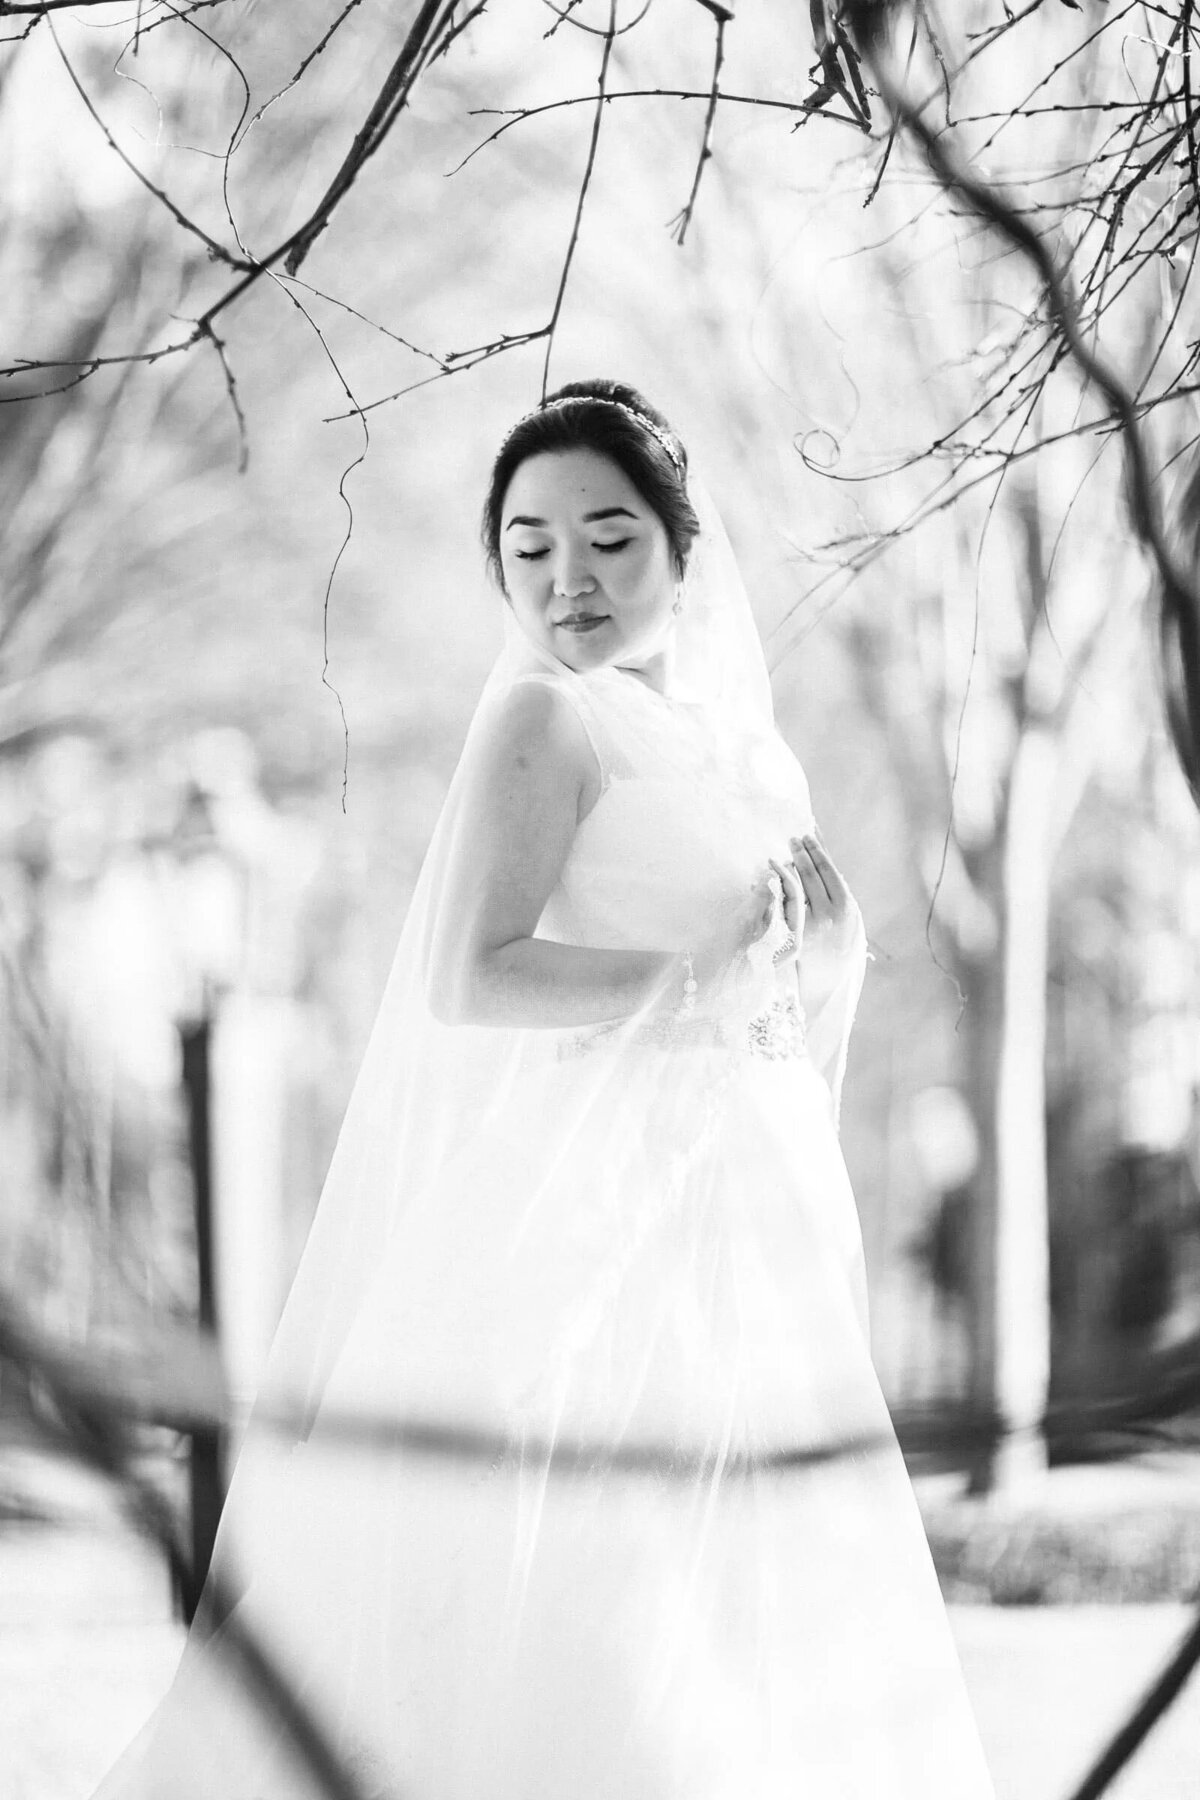 A bride standing in a wooded area